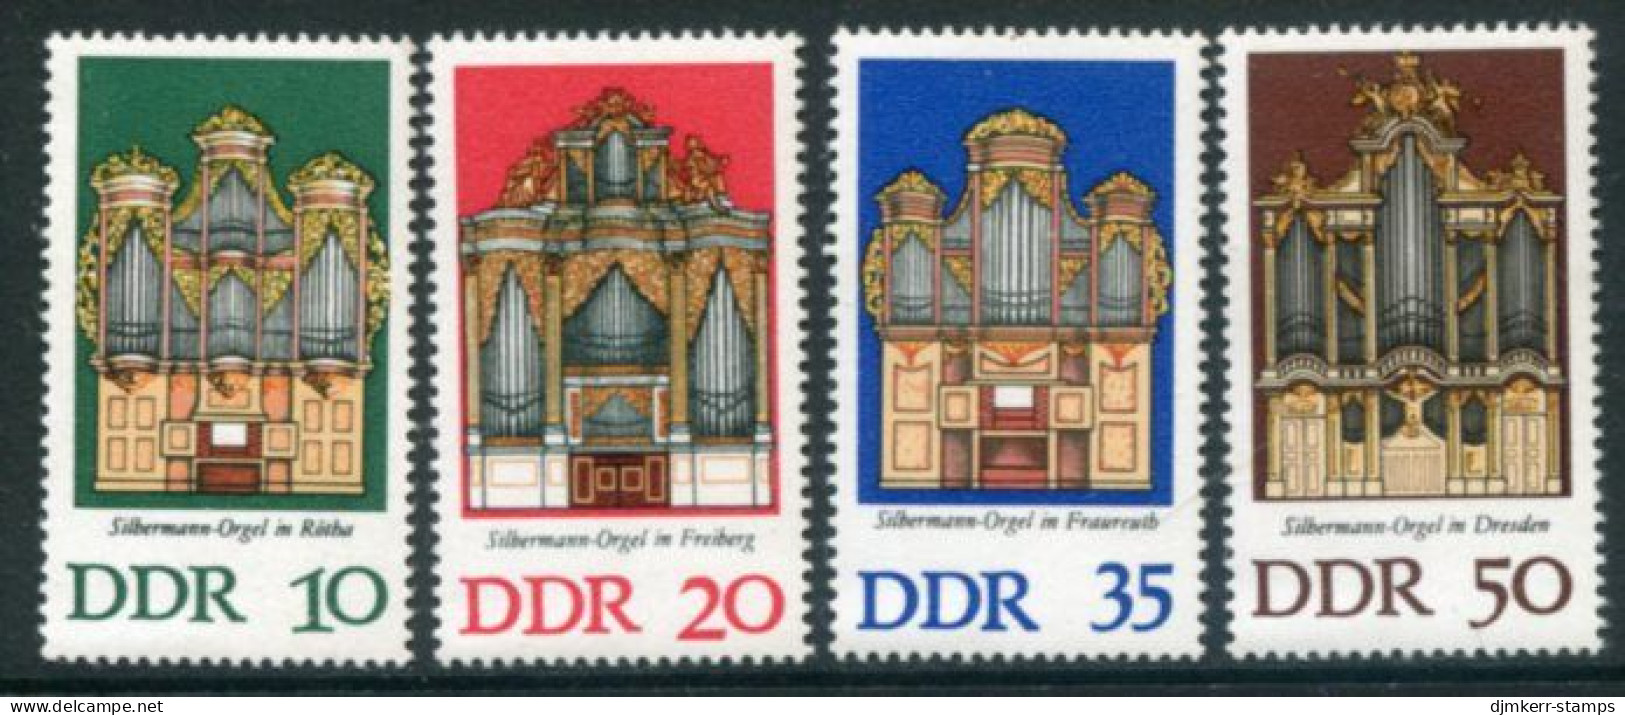 DDR / E. GERMANY 1976 Silbermann Organs  MNH / **.  Michel 2111-14 - Unused Stamps